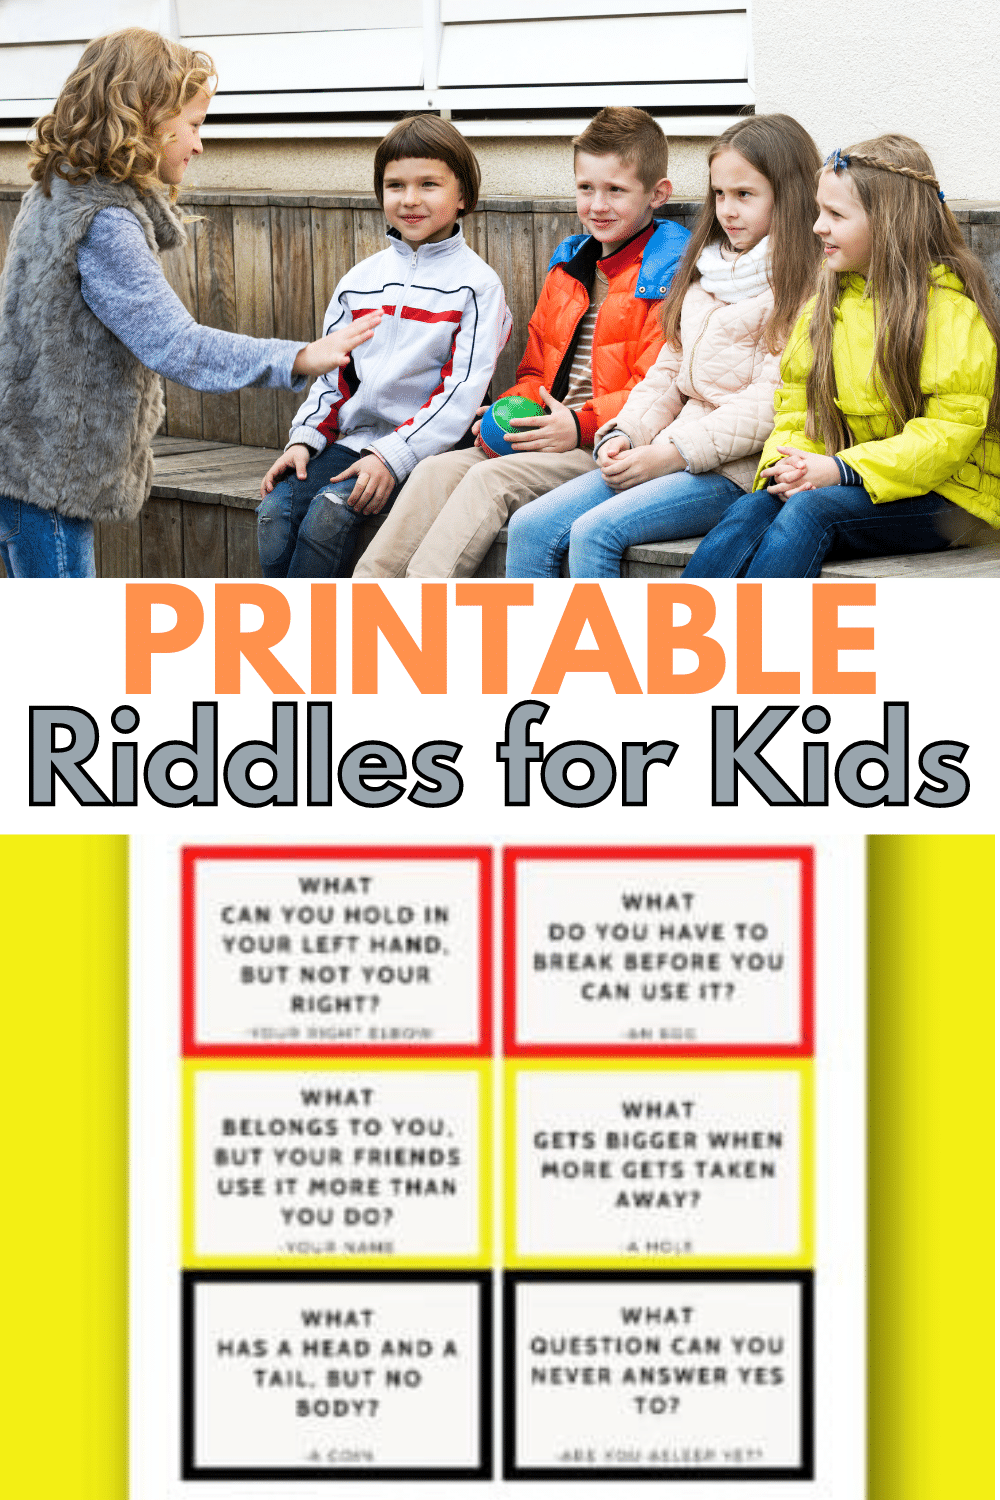 These printable riddles for kids are fun to solve and will get your child thinking critically and creatively to solve these word puzzles. #riddles #printables #activitiesforkids via @wondermomwannab